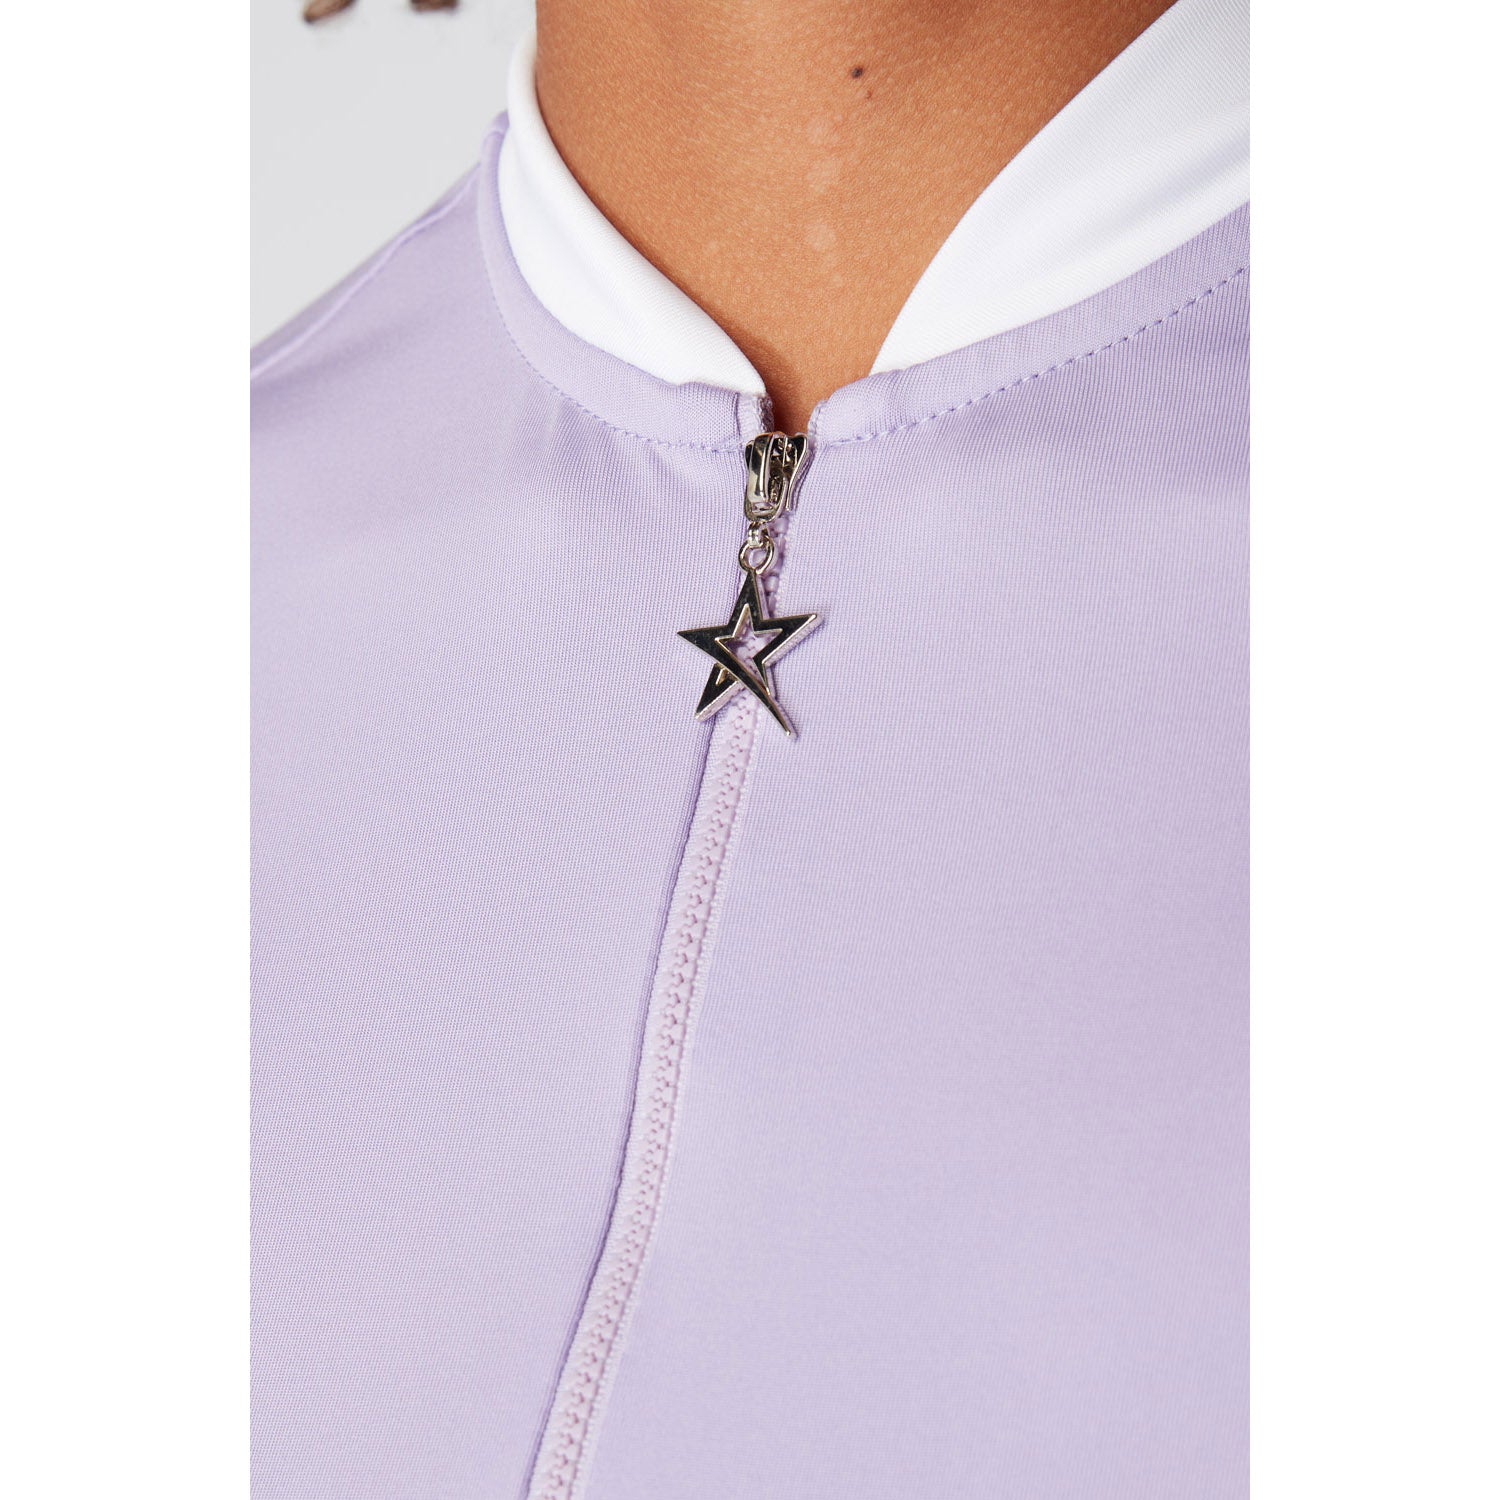 Swing Out Sister Ladies Cap Sleeve Polo with Ruched detail in Digital Lavender